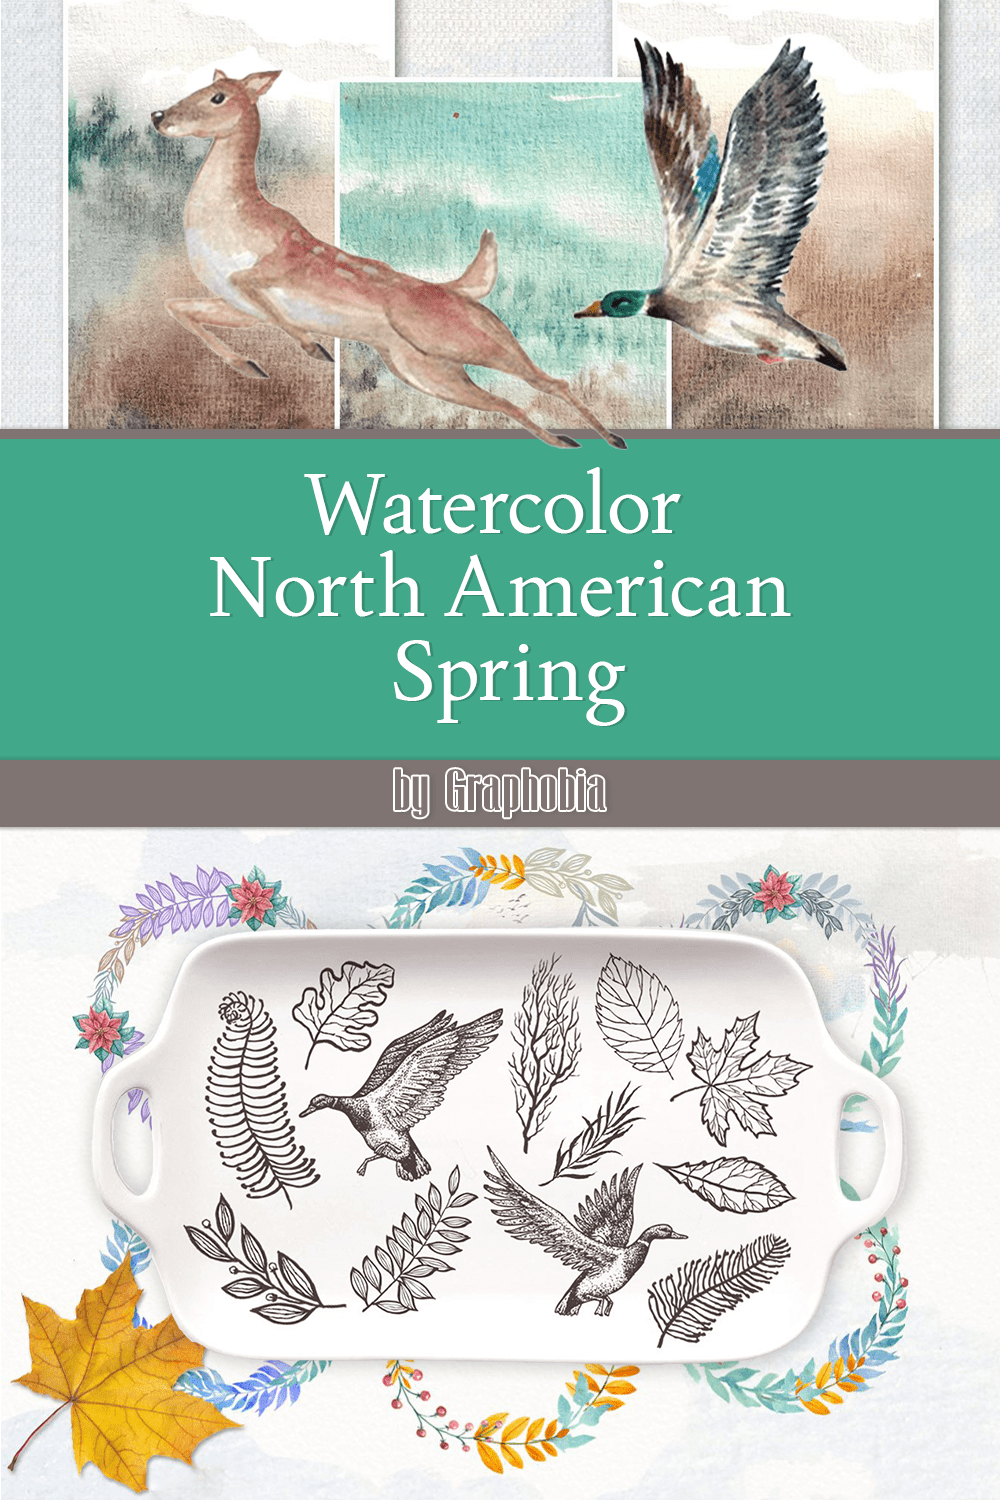 Watercolor North American Spring pinterest image.